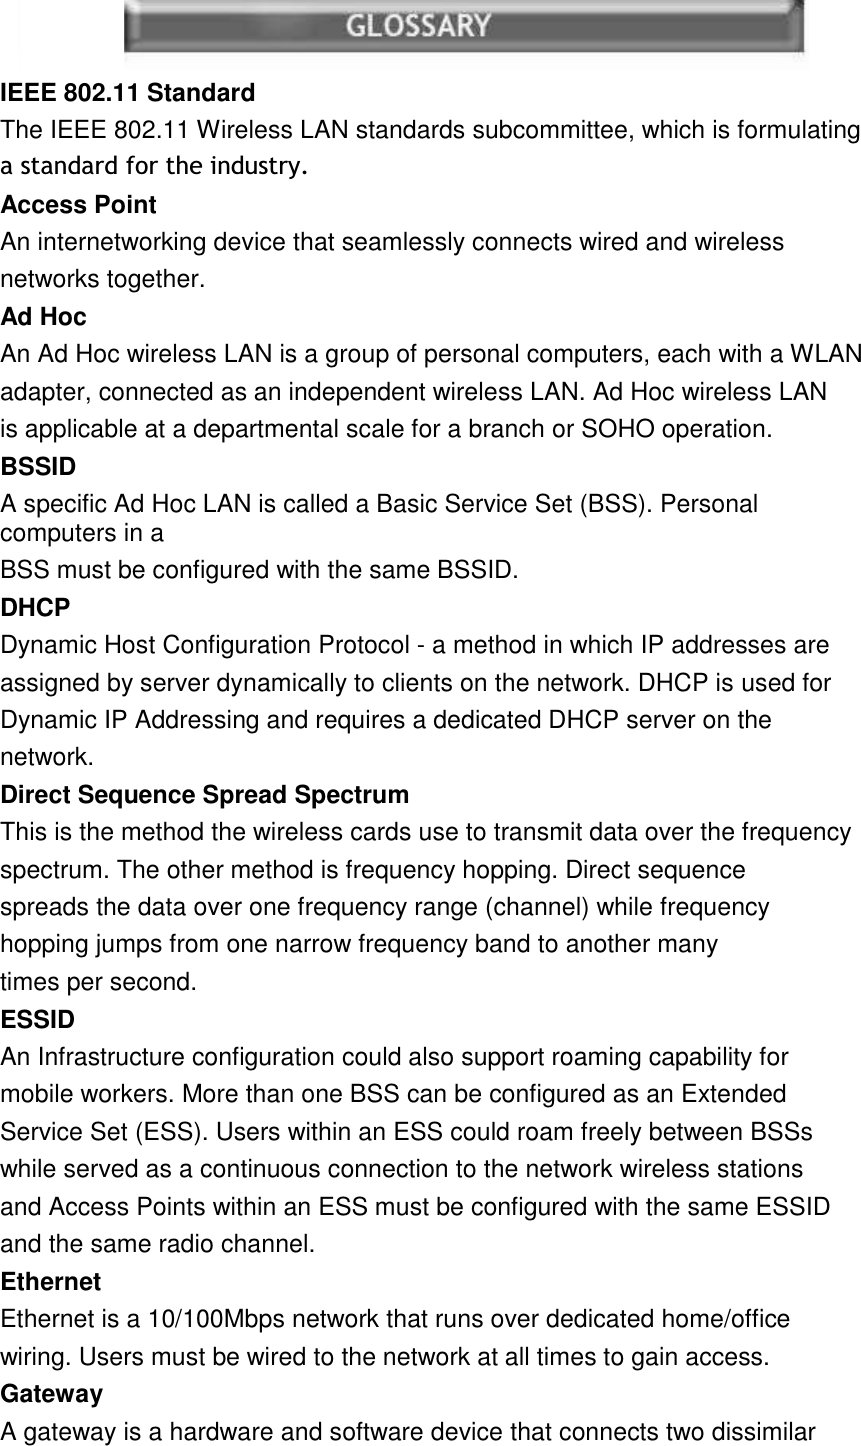 16  IEEE 802.11 StandardThe IEEE 802.11 Wireless LAN standards subcommittee, which is formulating DVWDQGDUGIRUWKHLQGXVWU\Access PointAn internetworking device that seamlessly connects wired and wireless networks together. Ad HocAn Ad Hoc wireless LAN is a group of personal computers, each with a WLAN adapter, connected as an independent wireless LAN. Ad Hoc wireless LAN is applicable at a departmental scale for a branch or SOHO operation. BSSIDA specific Ad Hoc LAN is called a Basic Service Set (BSS). Personal computers in a BSS must be configured with the same BSSID. DHCPDynamic Host Configuration Protocol - a method in which IP addresses are assigned by server dynamically to clients on the network. DHCP is used for Dynamic IP Addressing and requires a dedicated DHCP server on the network. Direct Sequence Spread SpectrumThis is the method the wireless cards use to transmit data over the frequency spectrum. The other method is frequency hopping. Direct sequence spreads the data over one frequency range (channel) while frequency hopping jumps from one narrow frequency band to another many times per second. ESSIDAn Infrastructure configuration could also support roaming capability for mobile workers. More than one BSS can be configured as an Extended Service Set (ESS). Users within an ESS could roam freely between BSSs while served as a continuous connection to the network wireless stations and Access Points within an ESS must be configured with the same ESSID and the same radio channel. EthernetEthernet is a 10/100Mbps network that runs over dedicated home/office wiring. Users must be wired to the network at all times to gain access. GatewayA gateway is a hardware and software device that connects two dissimilar 